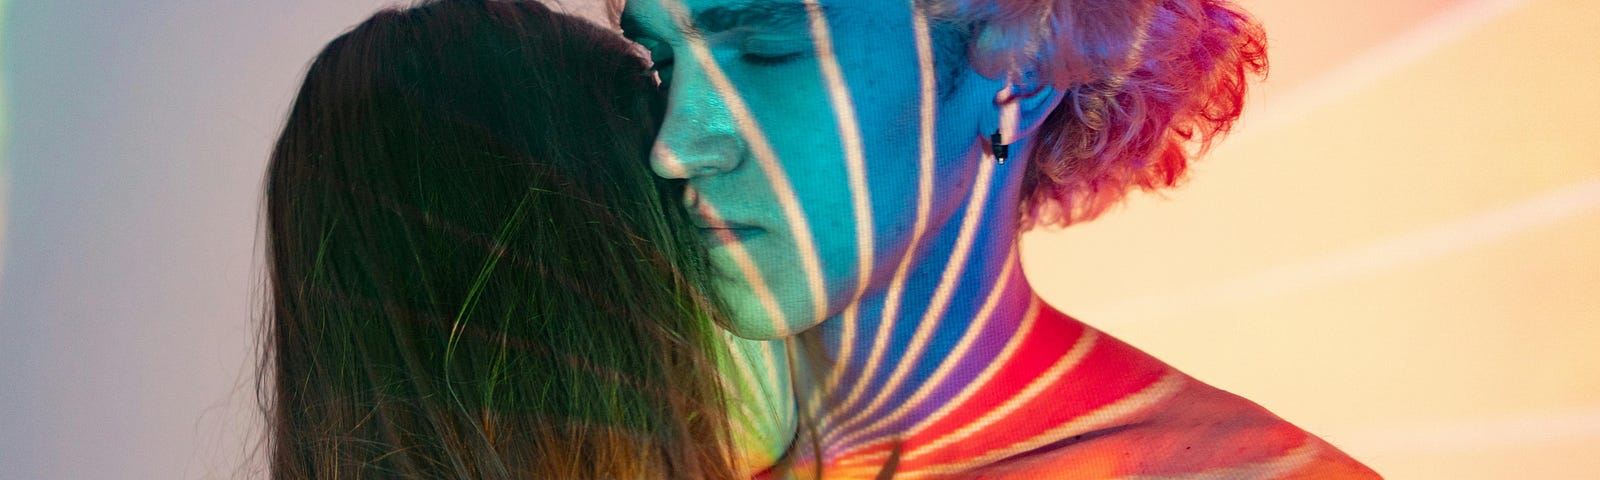 Two men embrace in a hug, one man has blond hair and his eyes are closed. The other has long, dark hair, and his face is out of view. They both have swirling, rainbow colors projected onto their faces and shoulders.